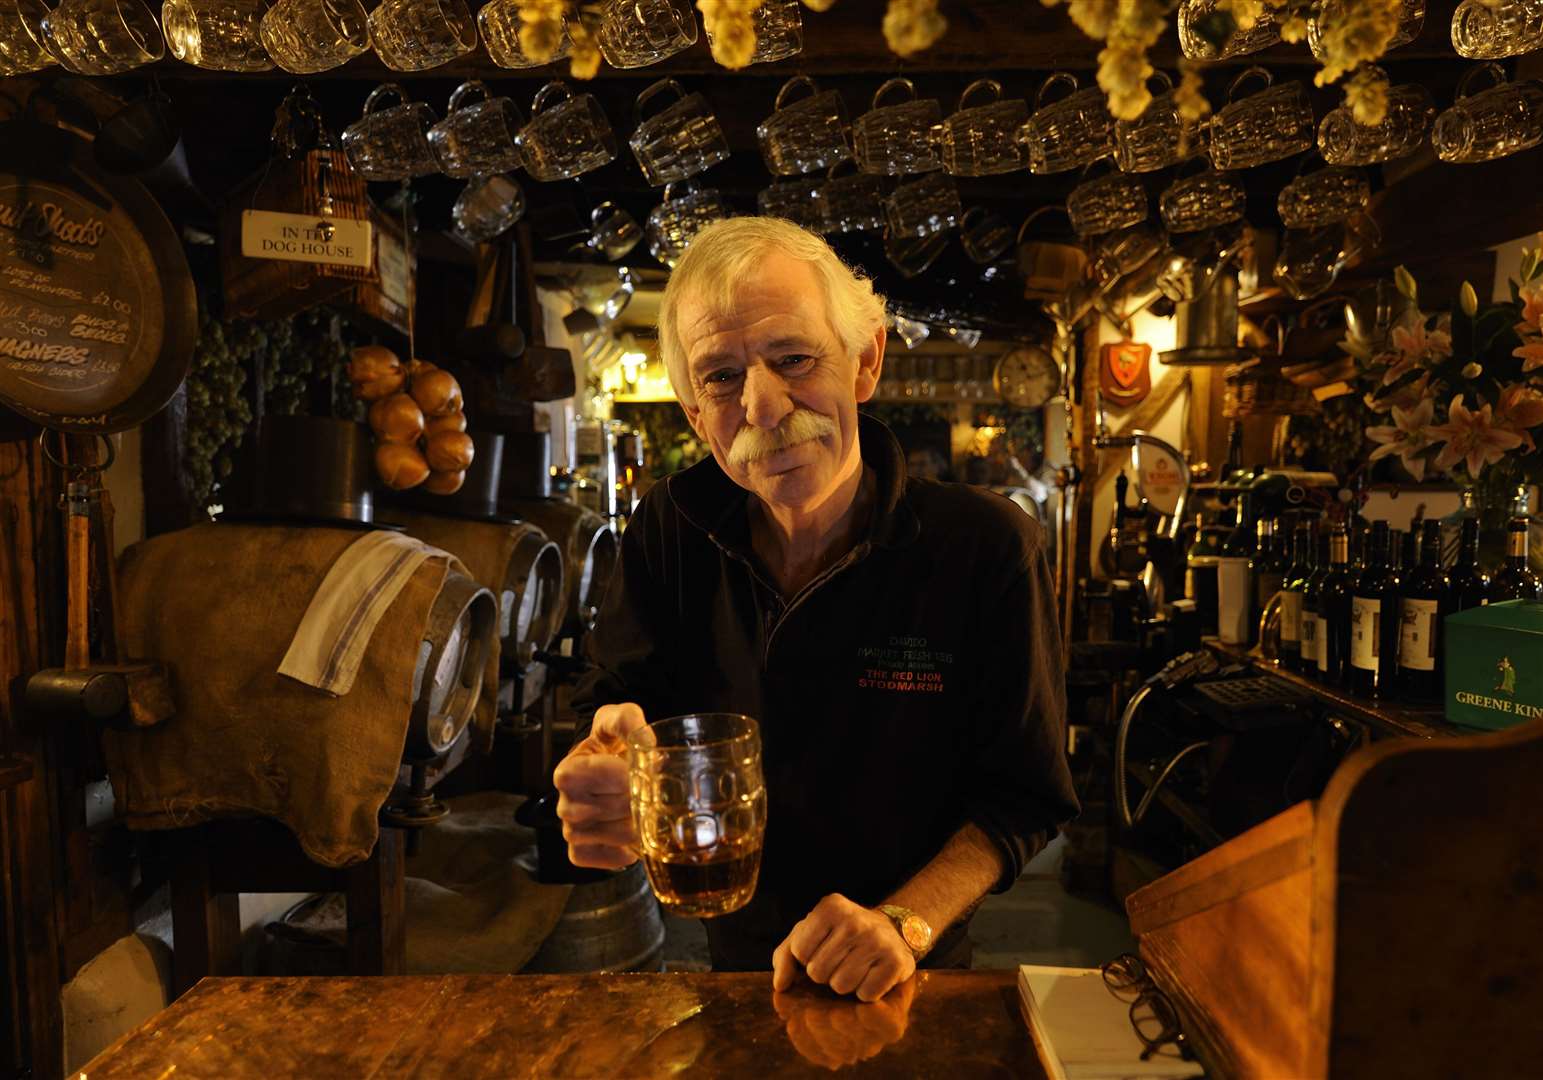 Much-loved former landlord of the Red Lion in Stodmarsh, Robert Whigham, pictured in October 2009, when he told Channel 4 documentary makers how he drank 15 pints of beer a day, with the first "sharpener" as early as 8am. Robert sadly died in 2016, and the pub, near Canterbury, was suddenly closed in September 2022. Picture: Channel 4